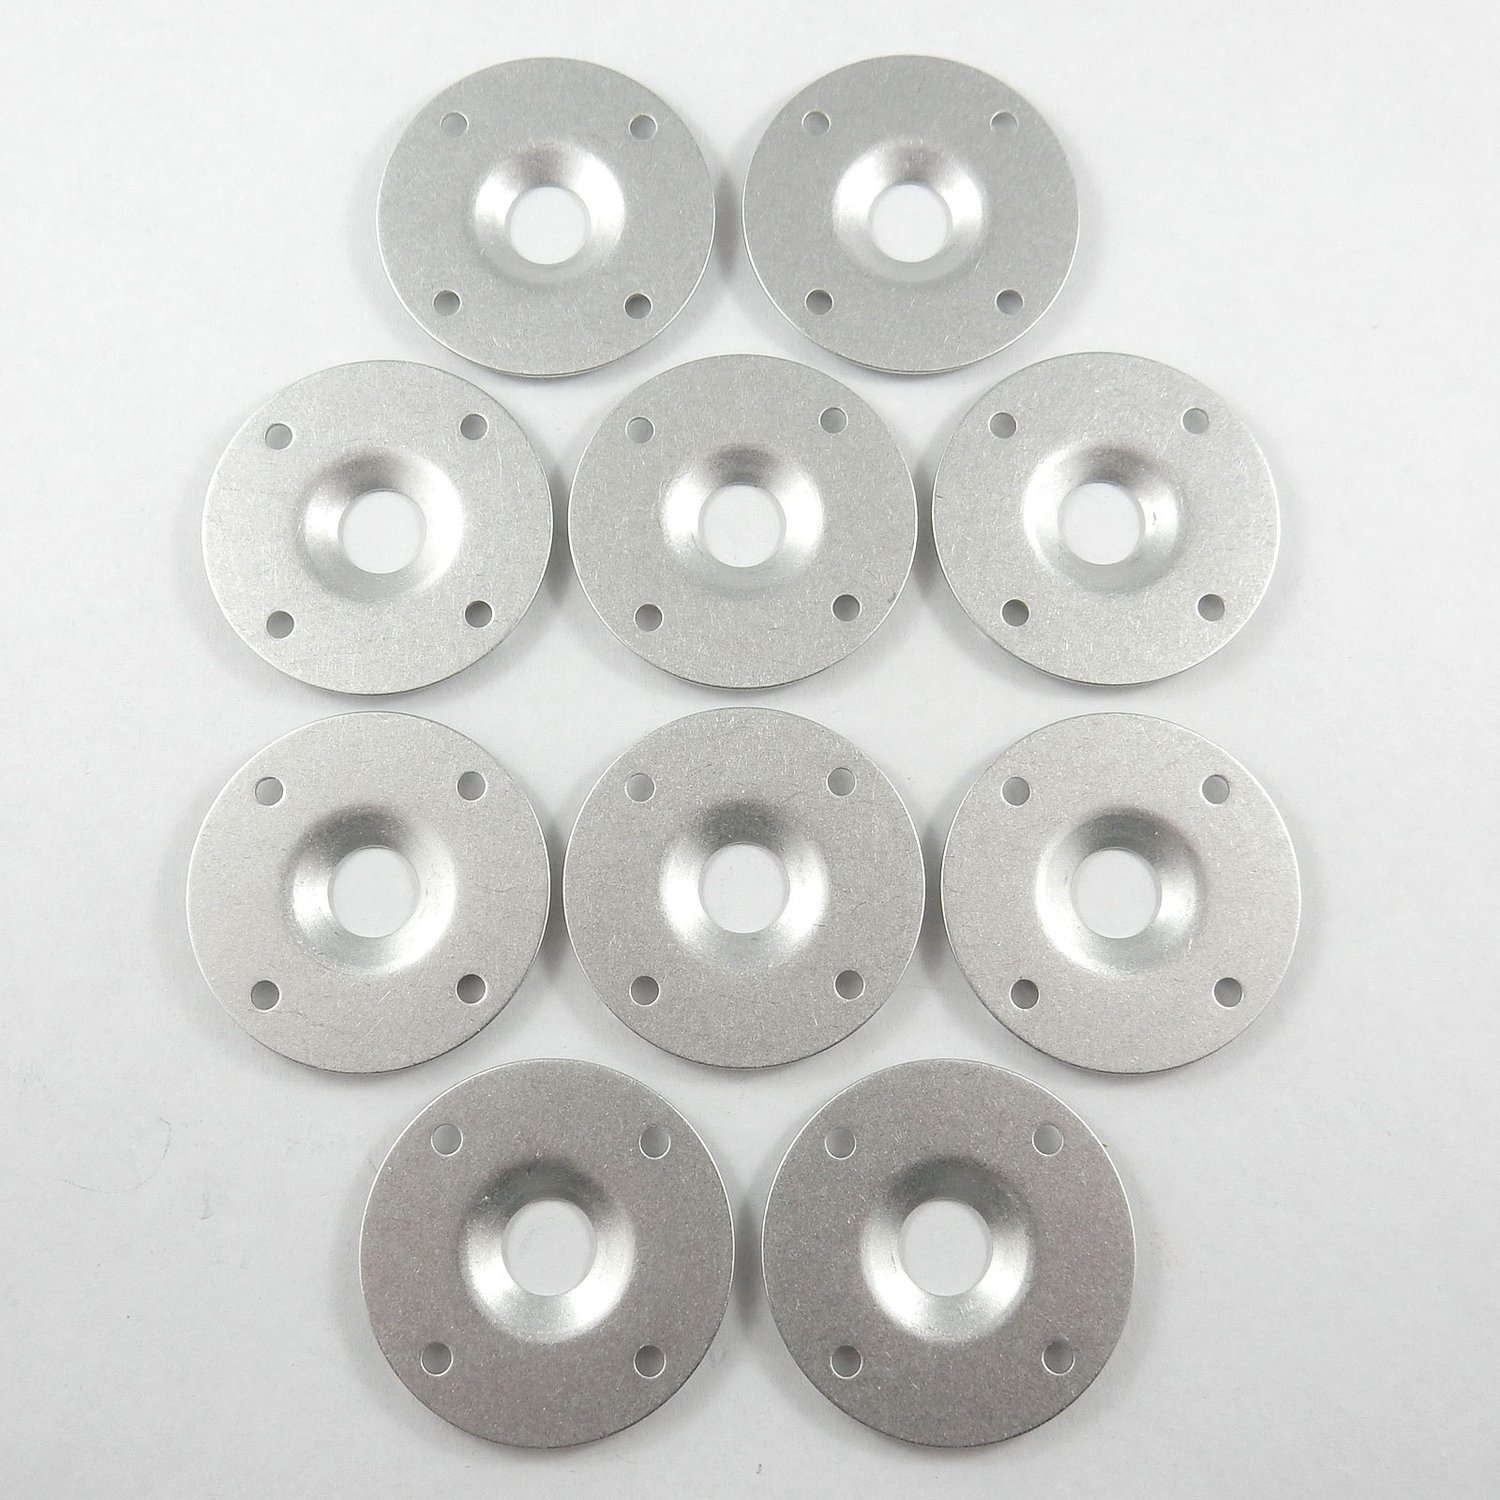 Panel Doubler Plates - Round - 10 Pack